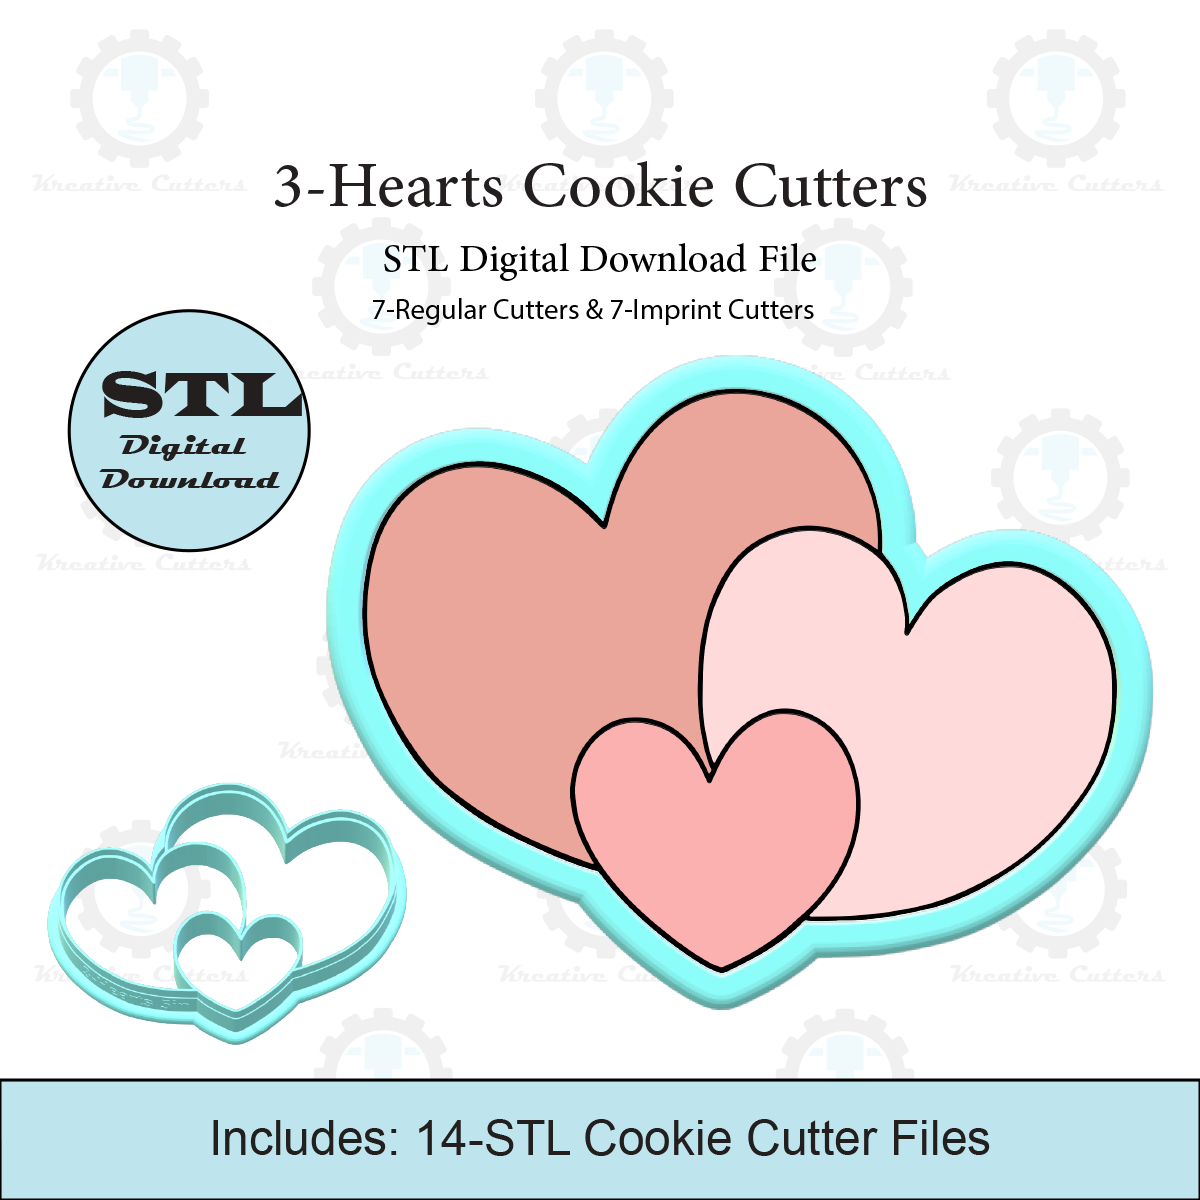 3-Hearts Cookie Cutters | Standard & Imprint Cutters Included | STL Files